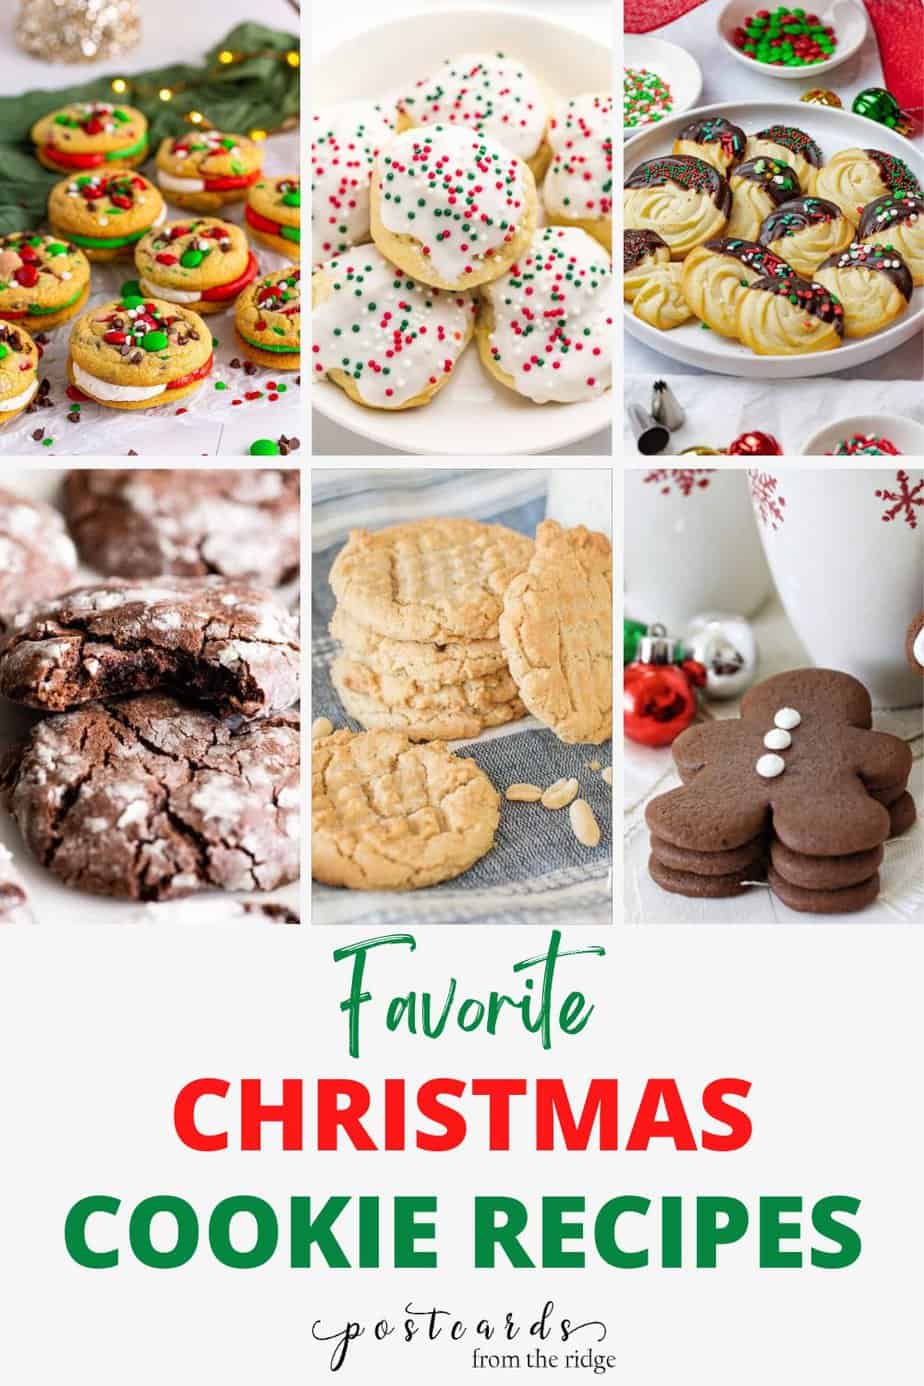 23 Favorite Christmas Cookie Recipes Your Family Will Love!